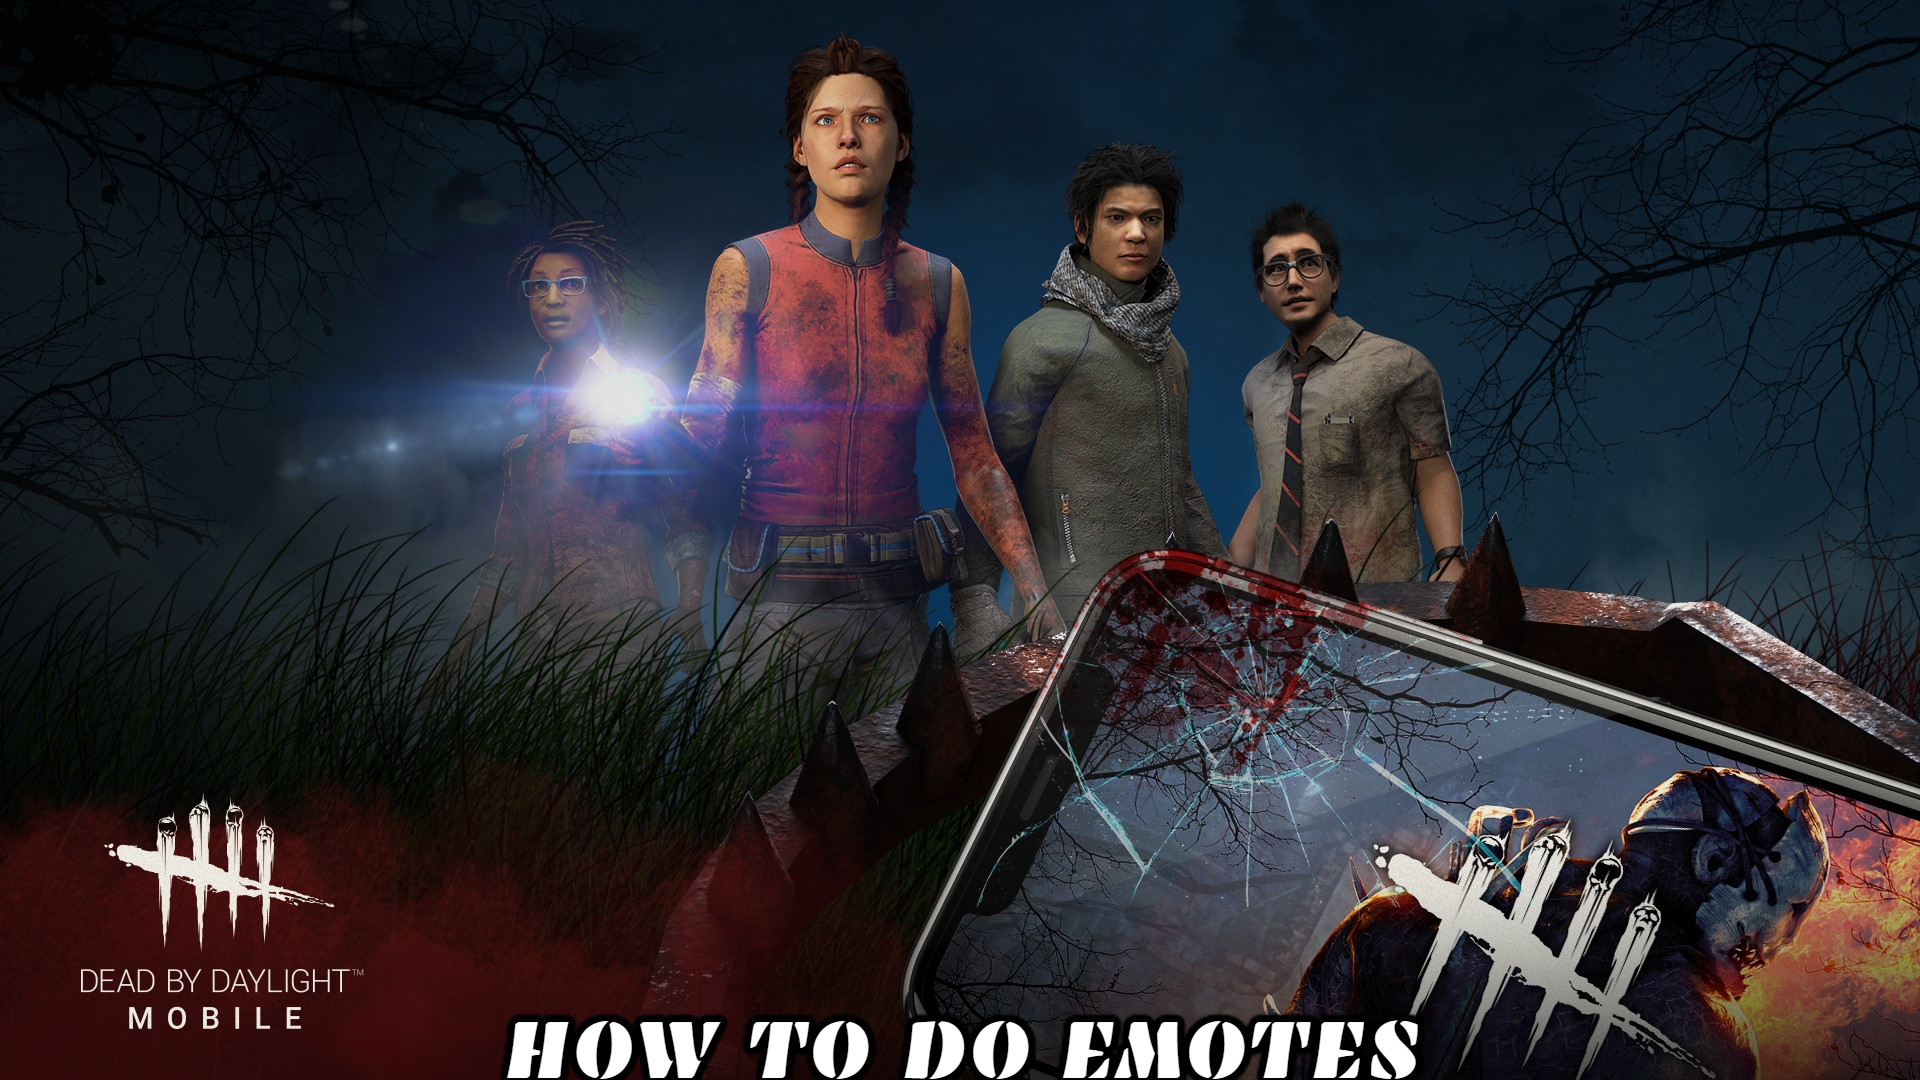 You are currently viewing How To Do Emotes in Dead by Daylight Mobile